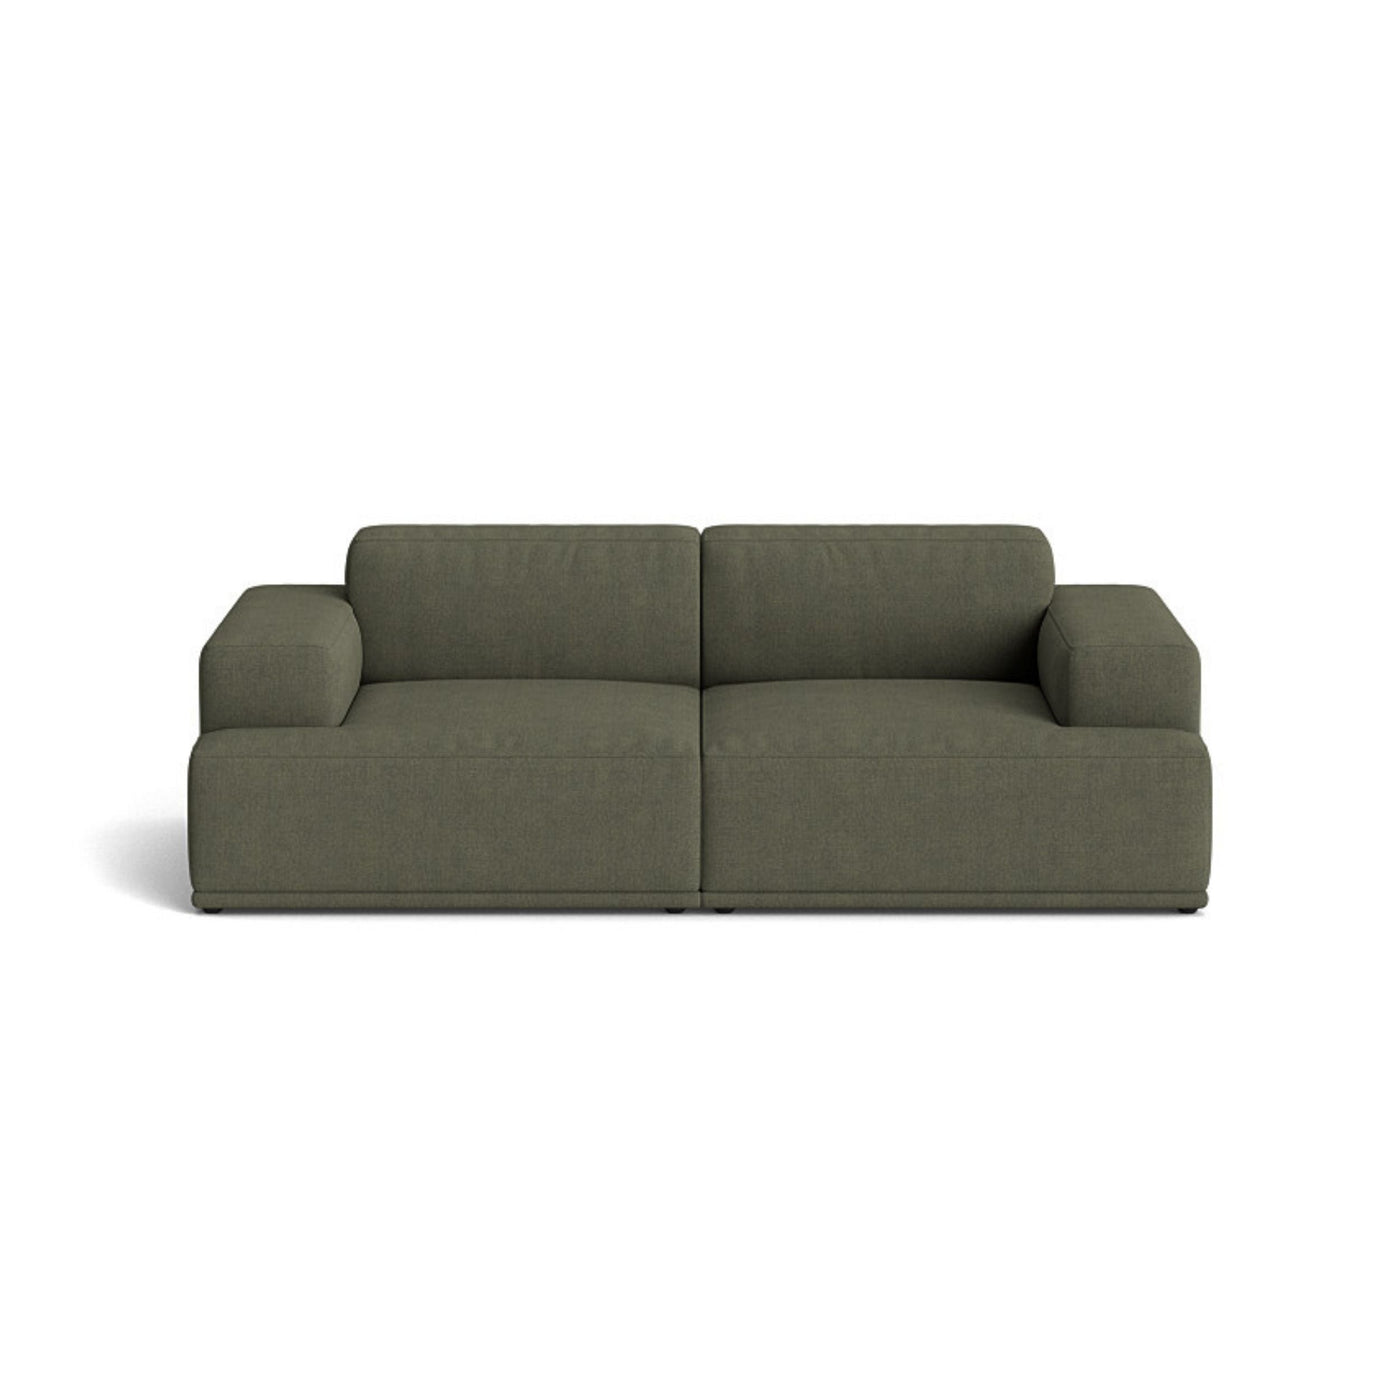 Muuto Connect Soft Modular 2 Seater Sofa, configuration 1. made-to-order from someday designs. #colour_fiord-961